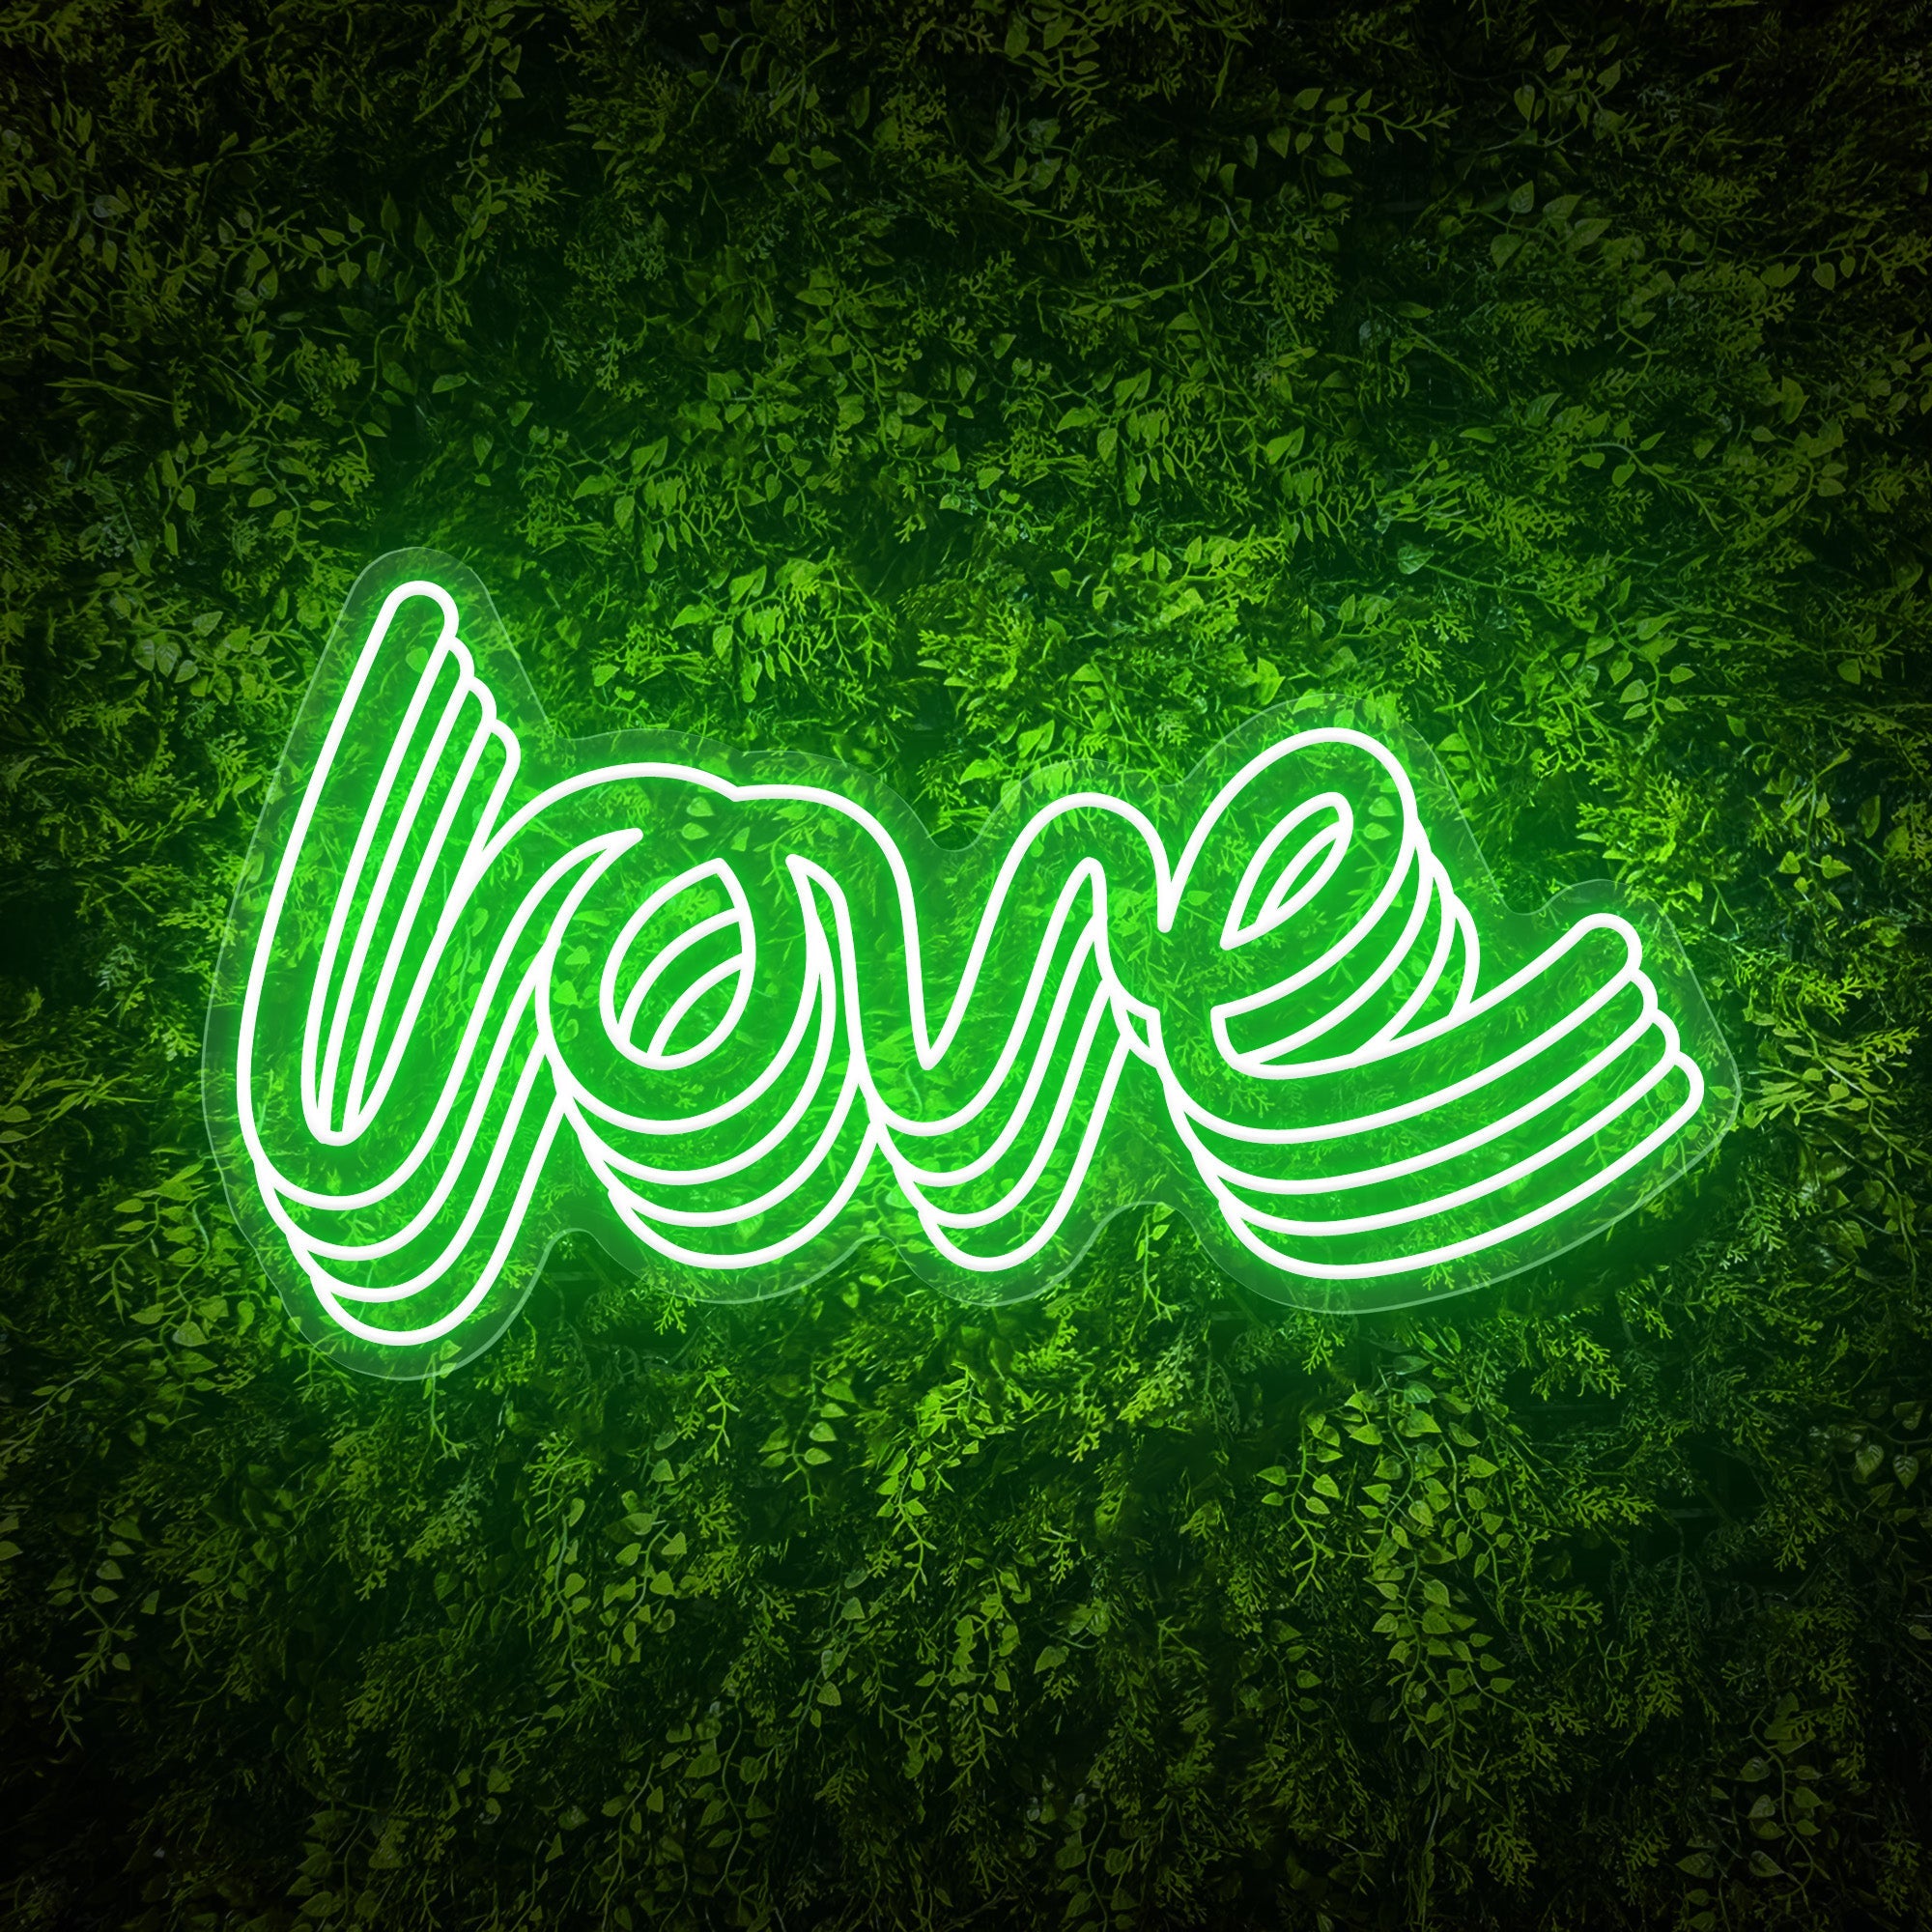 Polychrome "love" Word Neon Sign for Valentine's Day